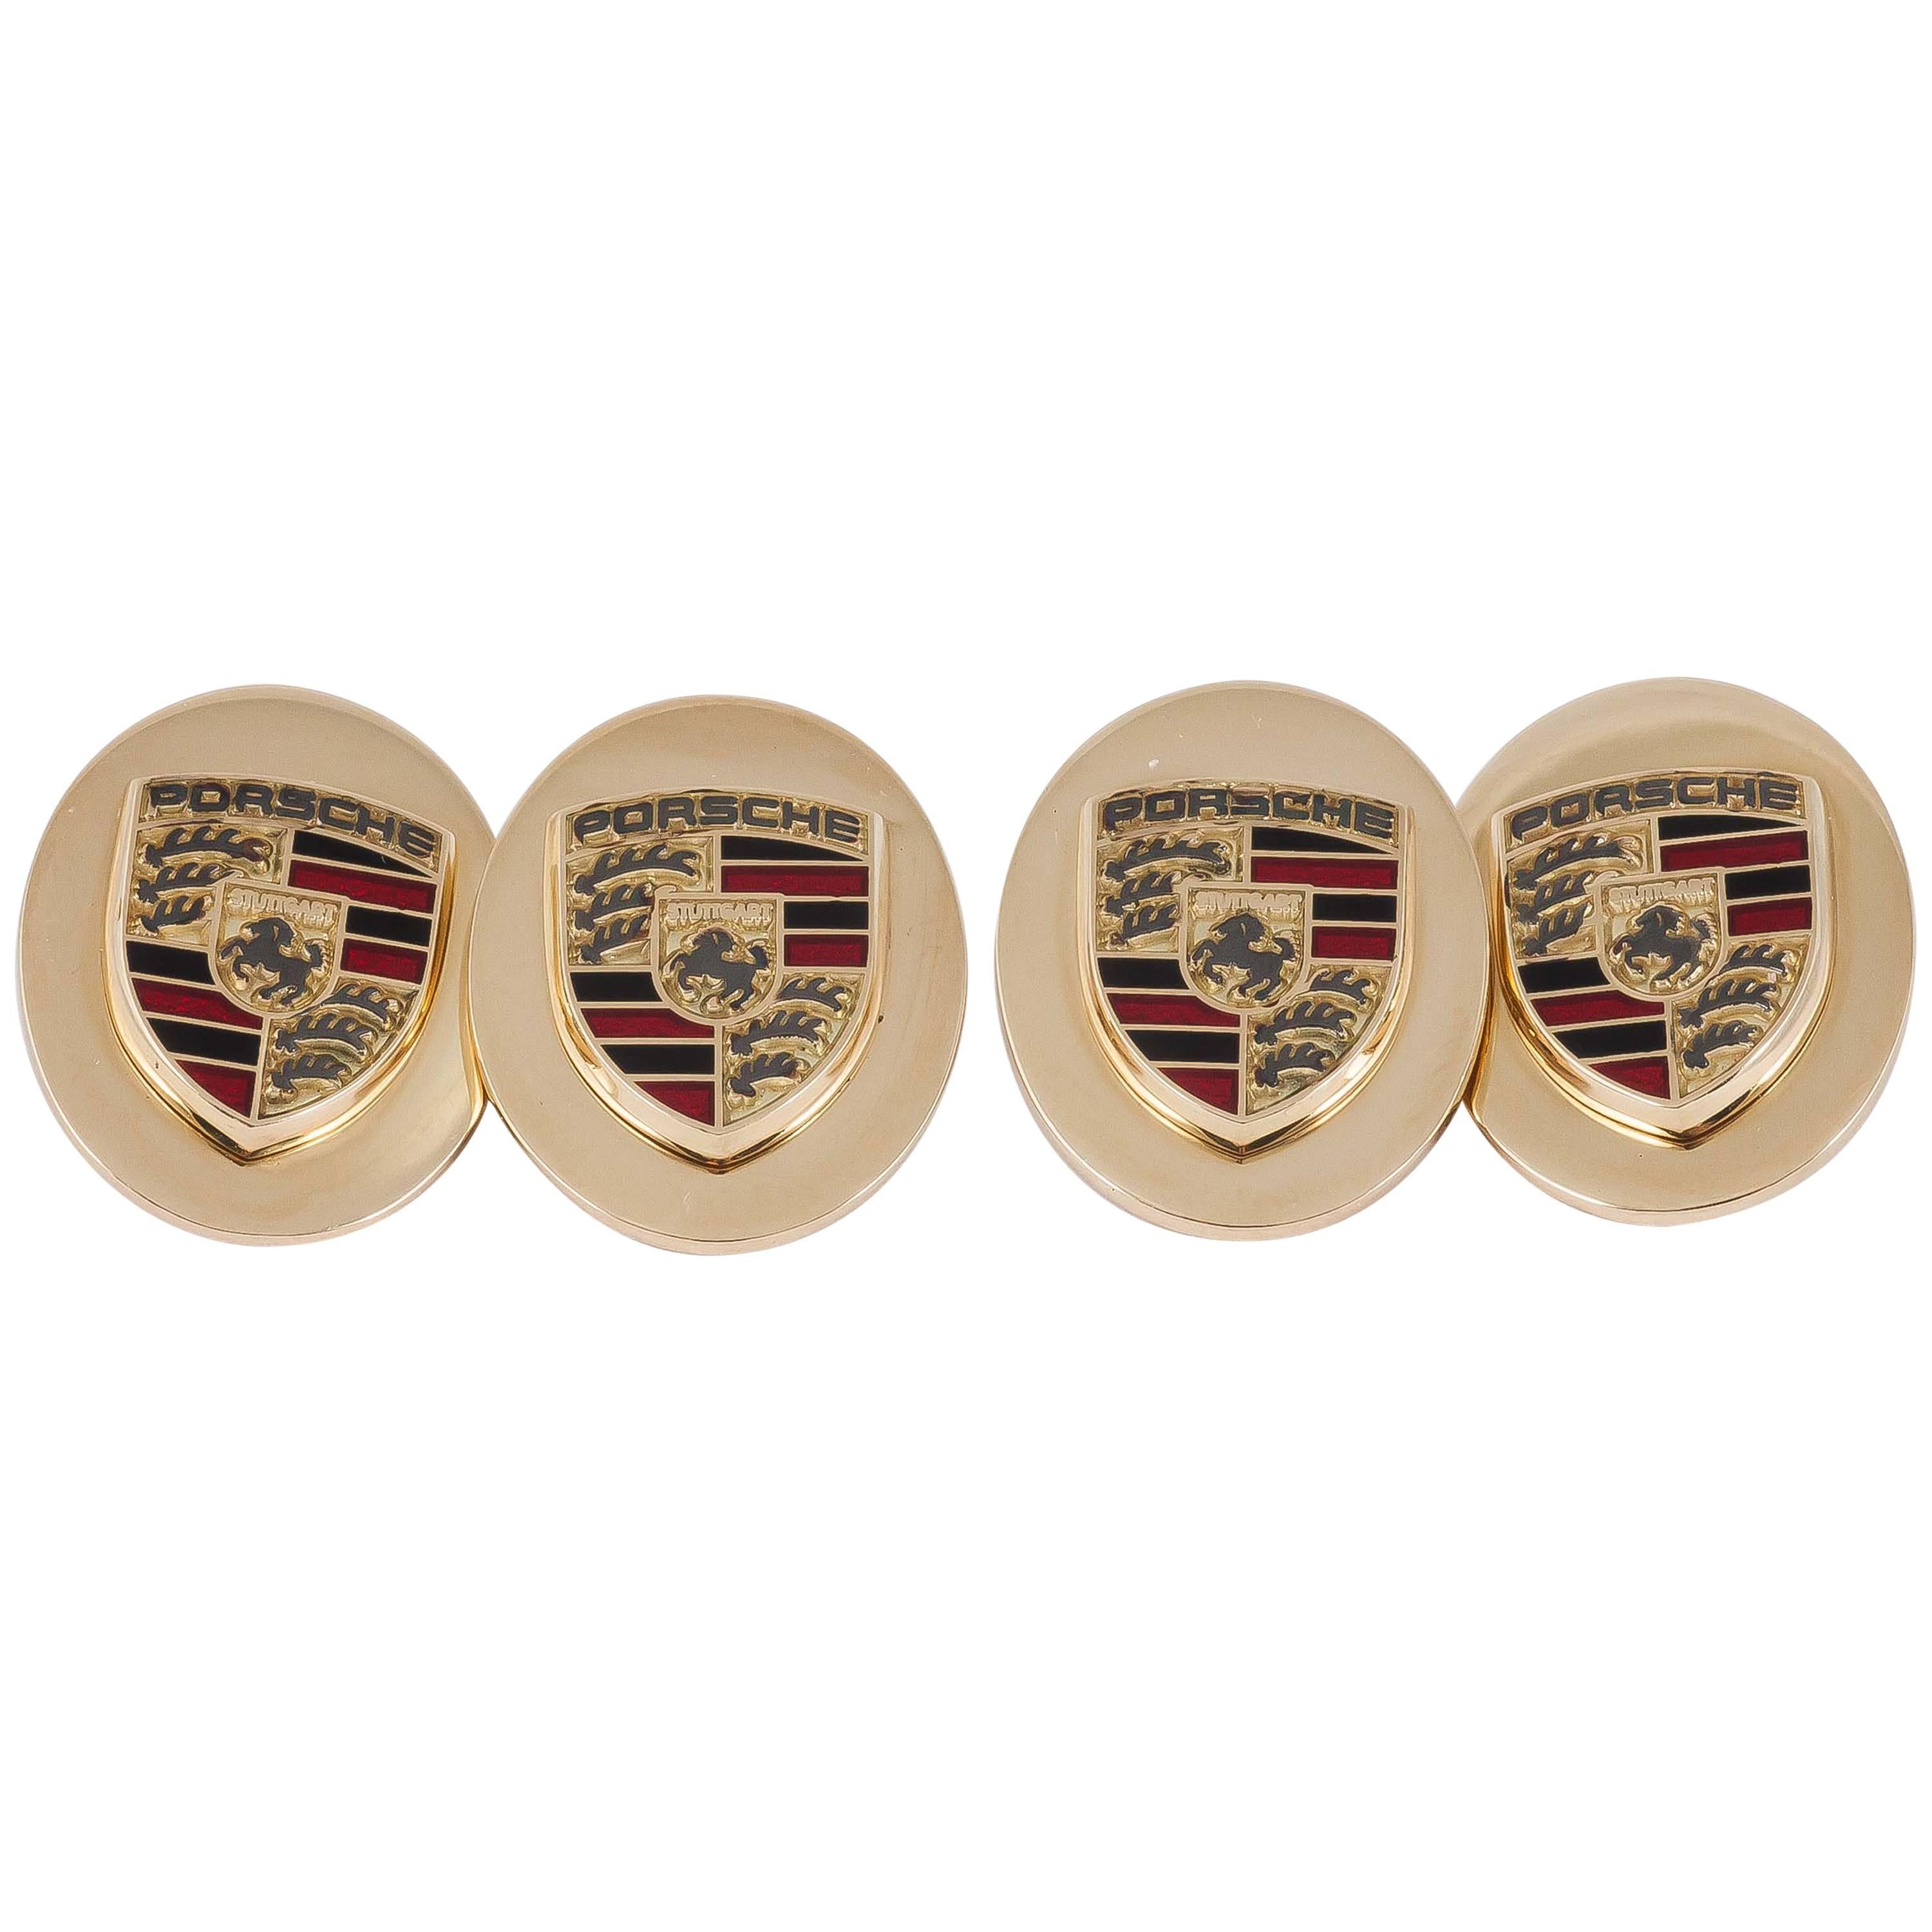 New Porsche Emblem Cufflinks in Heavy Quality 18 Carat Gold, English Made For Sale